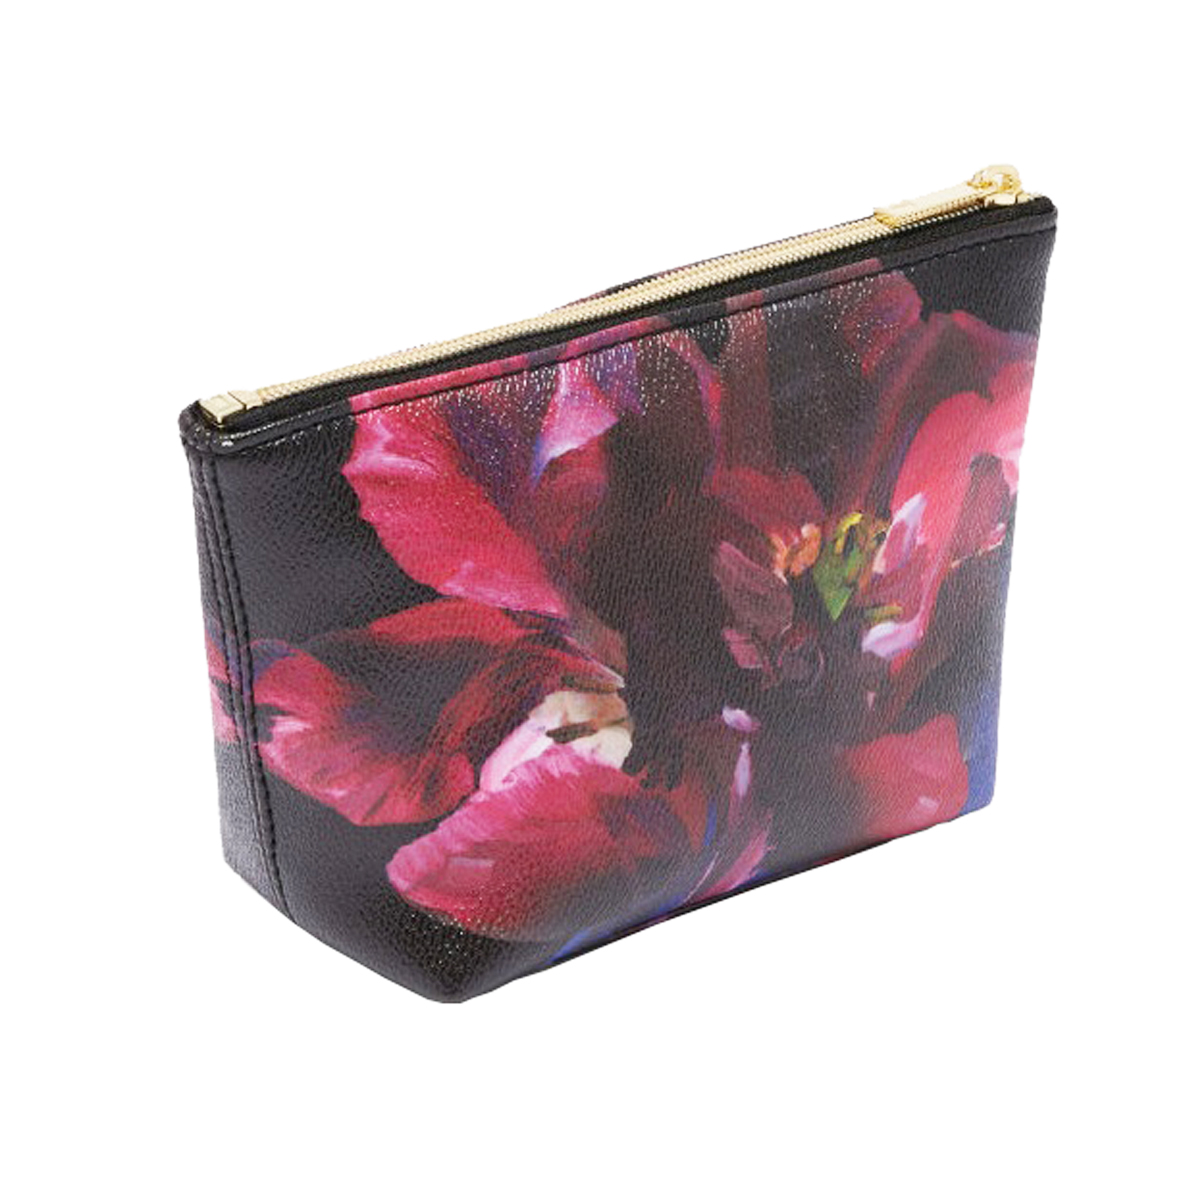 Luxury delicate ladies' cosmetic bag overall printed make up bag